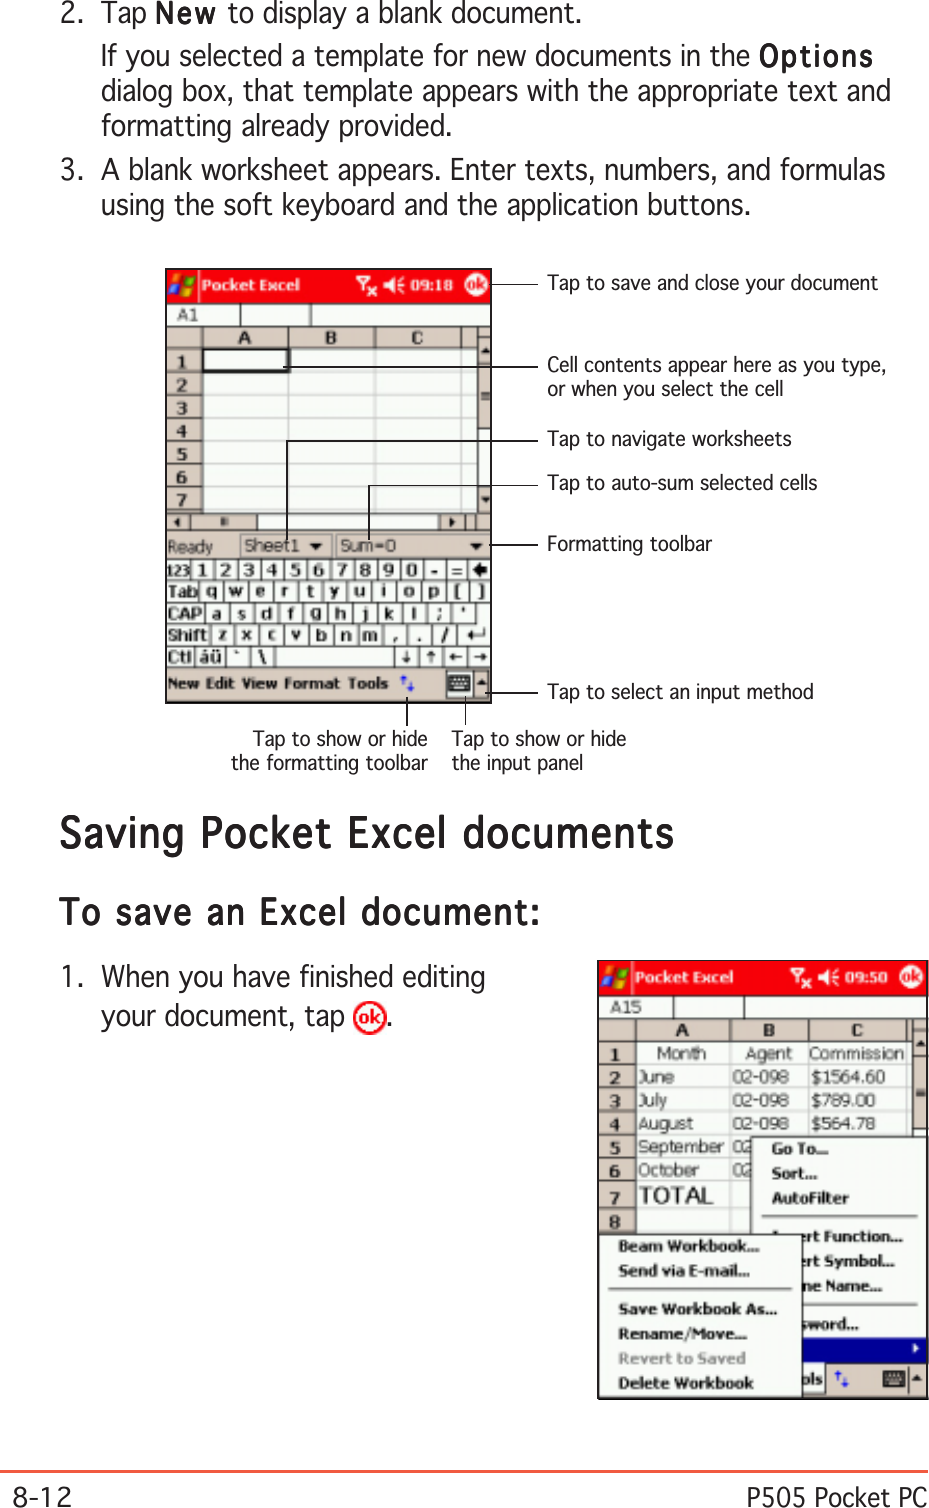 8-12P505 Pocket PCSaving Pocket Excel documentsSaving Pocket Excel documentsSaving Pocket Excel documentsSaving Pocket Excel documentsSaving Pocket Excel documentsTo save an Excel document:To save an Excel document:To save an Excel document:To save an Excel document:To save an Excel document:1. When you have finished editingyour document, tap  .2. Tap NewNewNewNewNe w  to display a blank document.If you selected a template for new documents in the OptionsOptionsOptionsOptionsOptionsdialog box, that template appears with the appropriate text andformatting already provided.3. A blank worksheet appears. Enter texts, numbers, and formulasusing the soft keyboard and the application buttons.Cell contents appear here as you type,or when you select the cellTap to select an input methodTap to show or hidethe input panelTap to save and close your documentFormatting toolbarTap to auto-sum selected cellsTap to navigate worksheetsTap to show or hidethe formatting toolbar